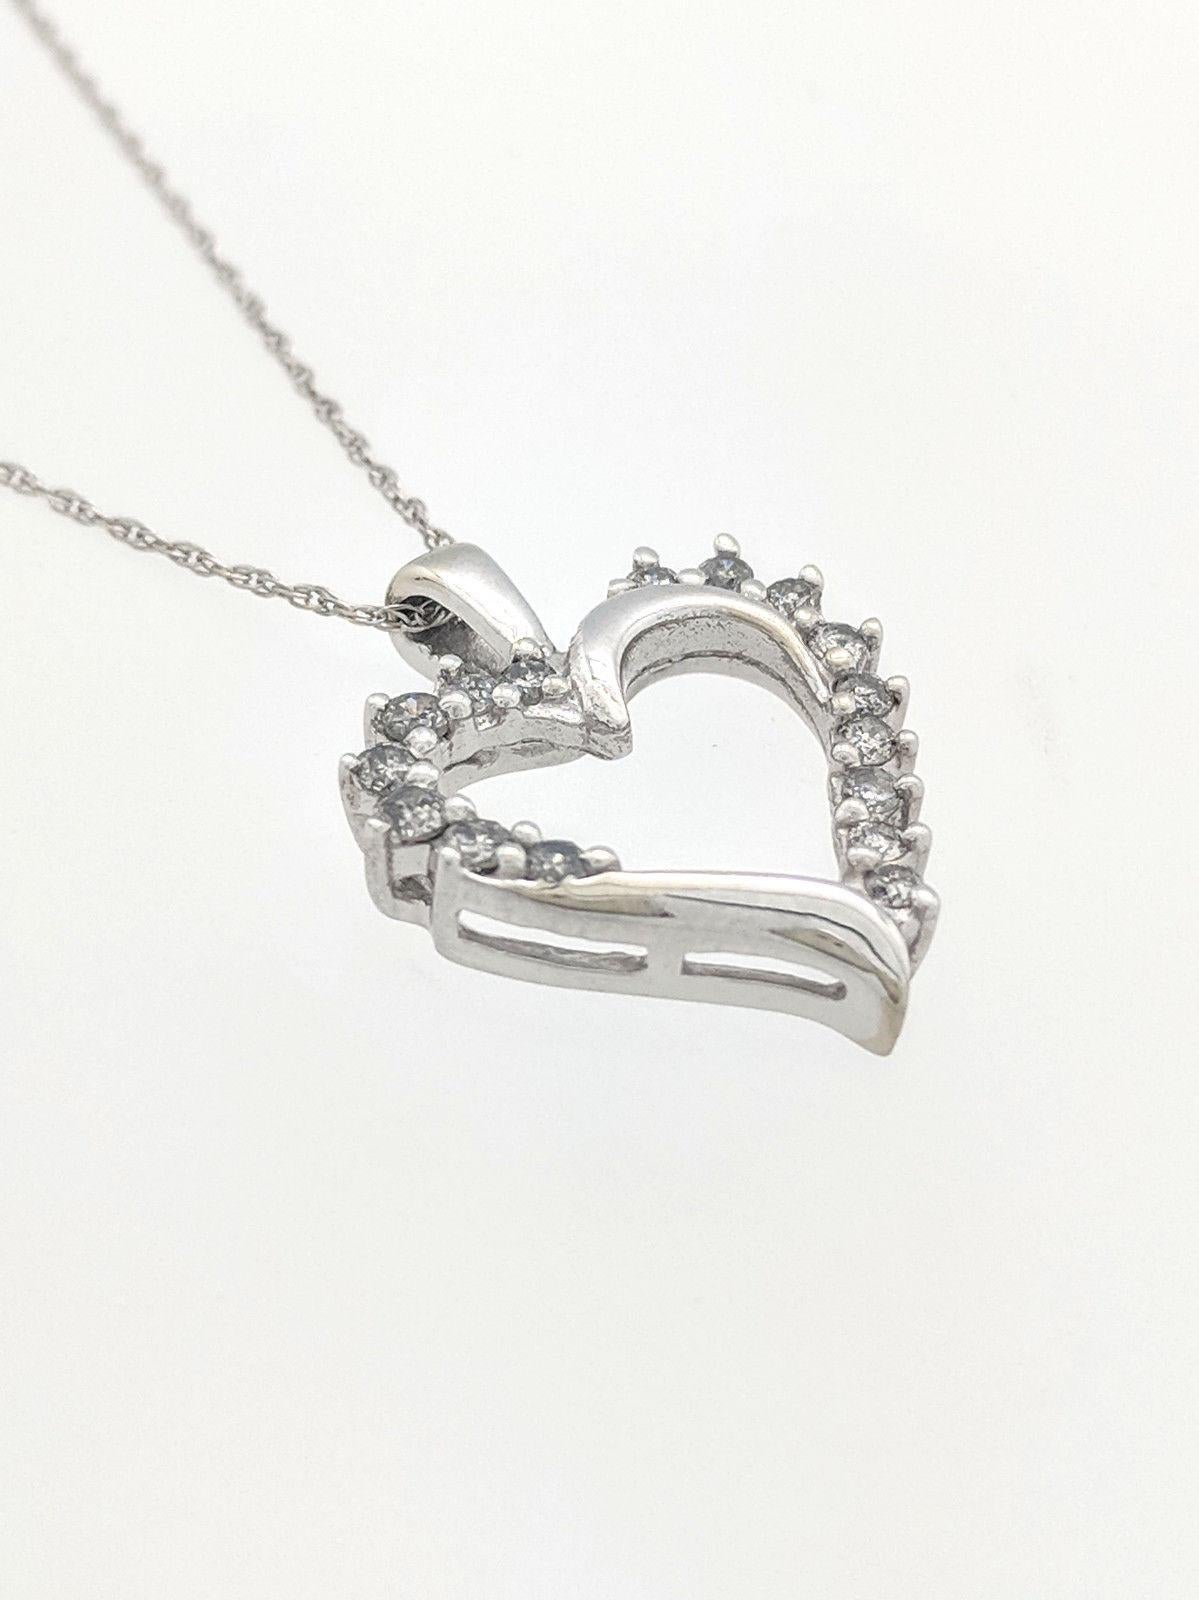 10 Karat White Gold Diamond Heart Pendant Necklace In Good Condition For Sale In Gainesville, FL